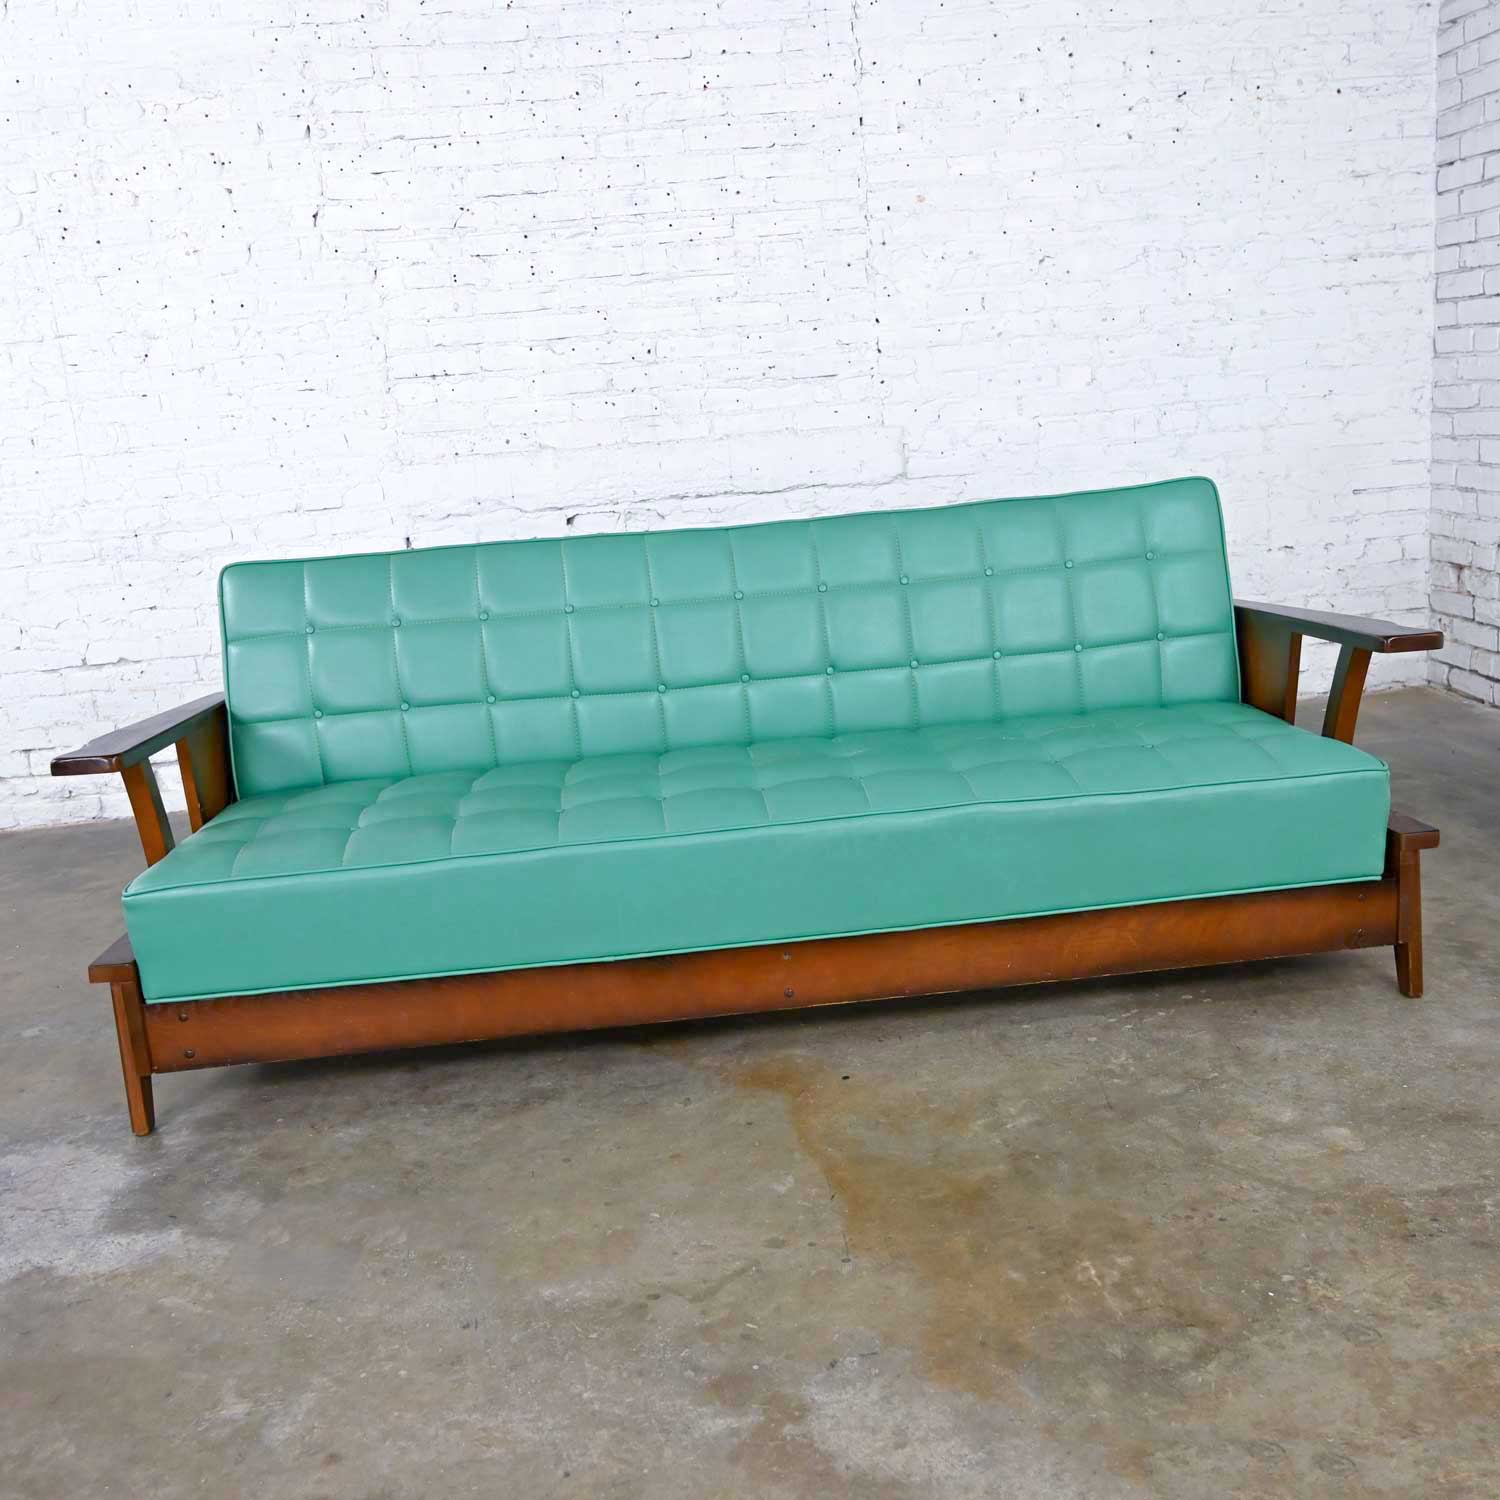 A Brandt Ranch Oak Style Turquoise Vinyl Convertible Sofa Daybed by Economy Furniture